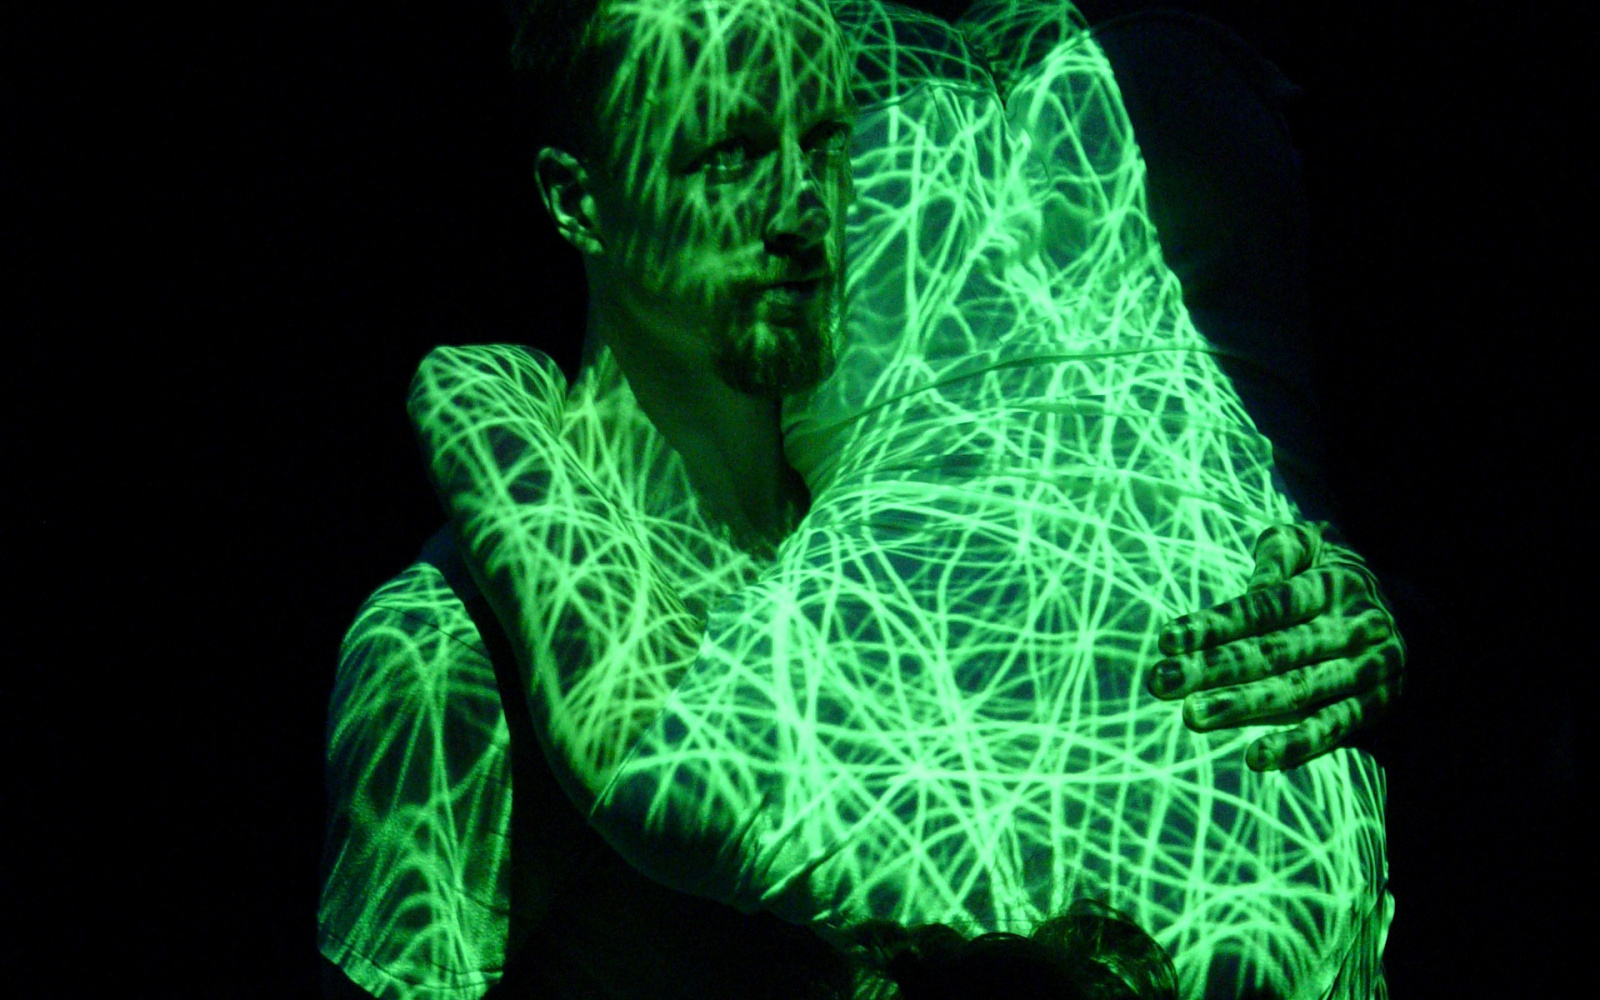 Kenneth Flak stands upright, in his left arm he holds Külli Roosna, she hugs him. Both are covered by a projection with neon green lines.